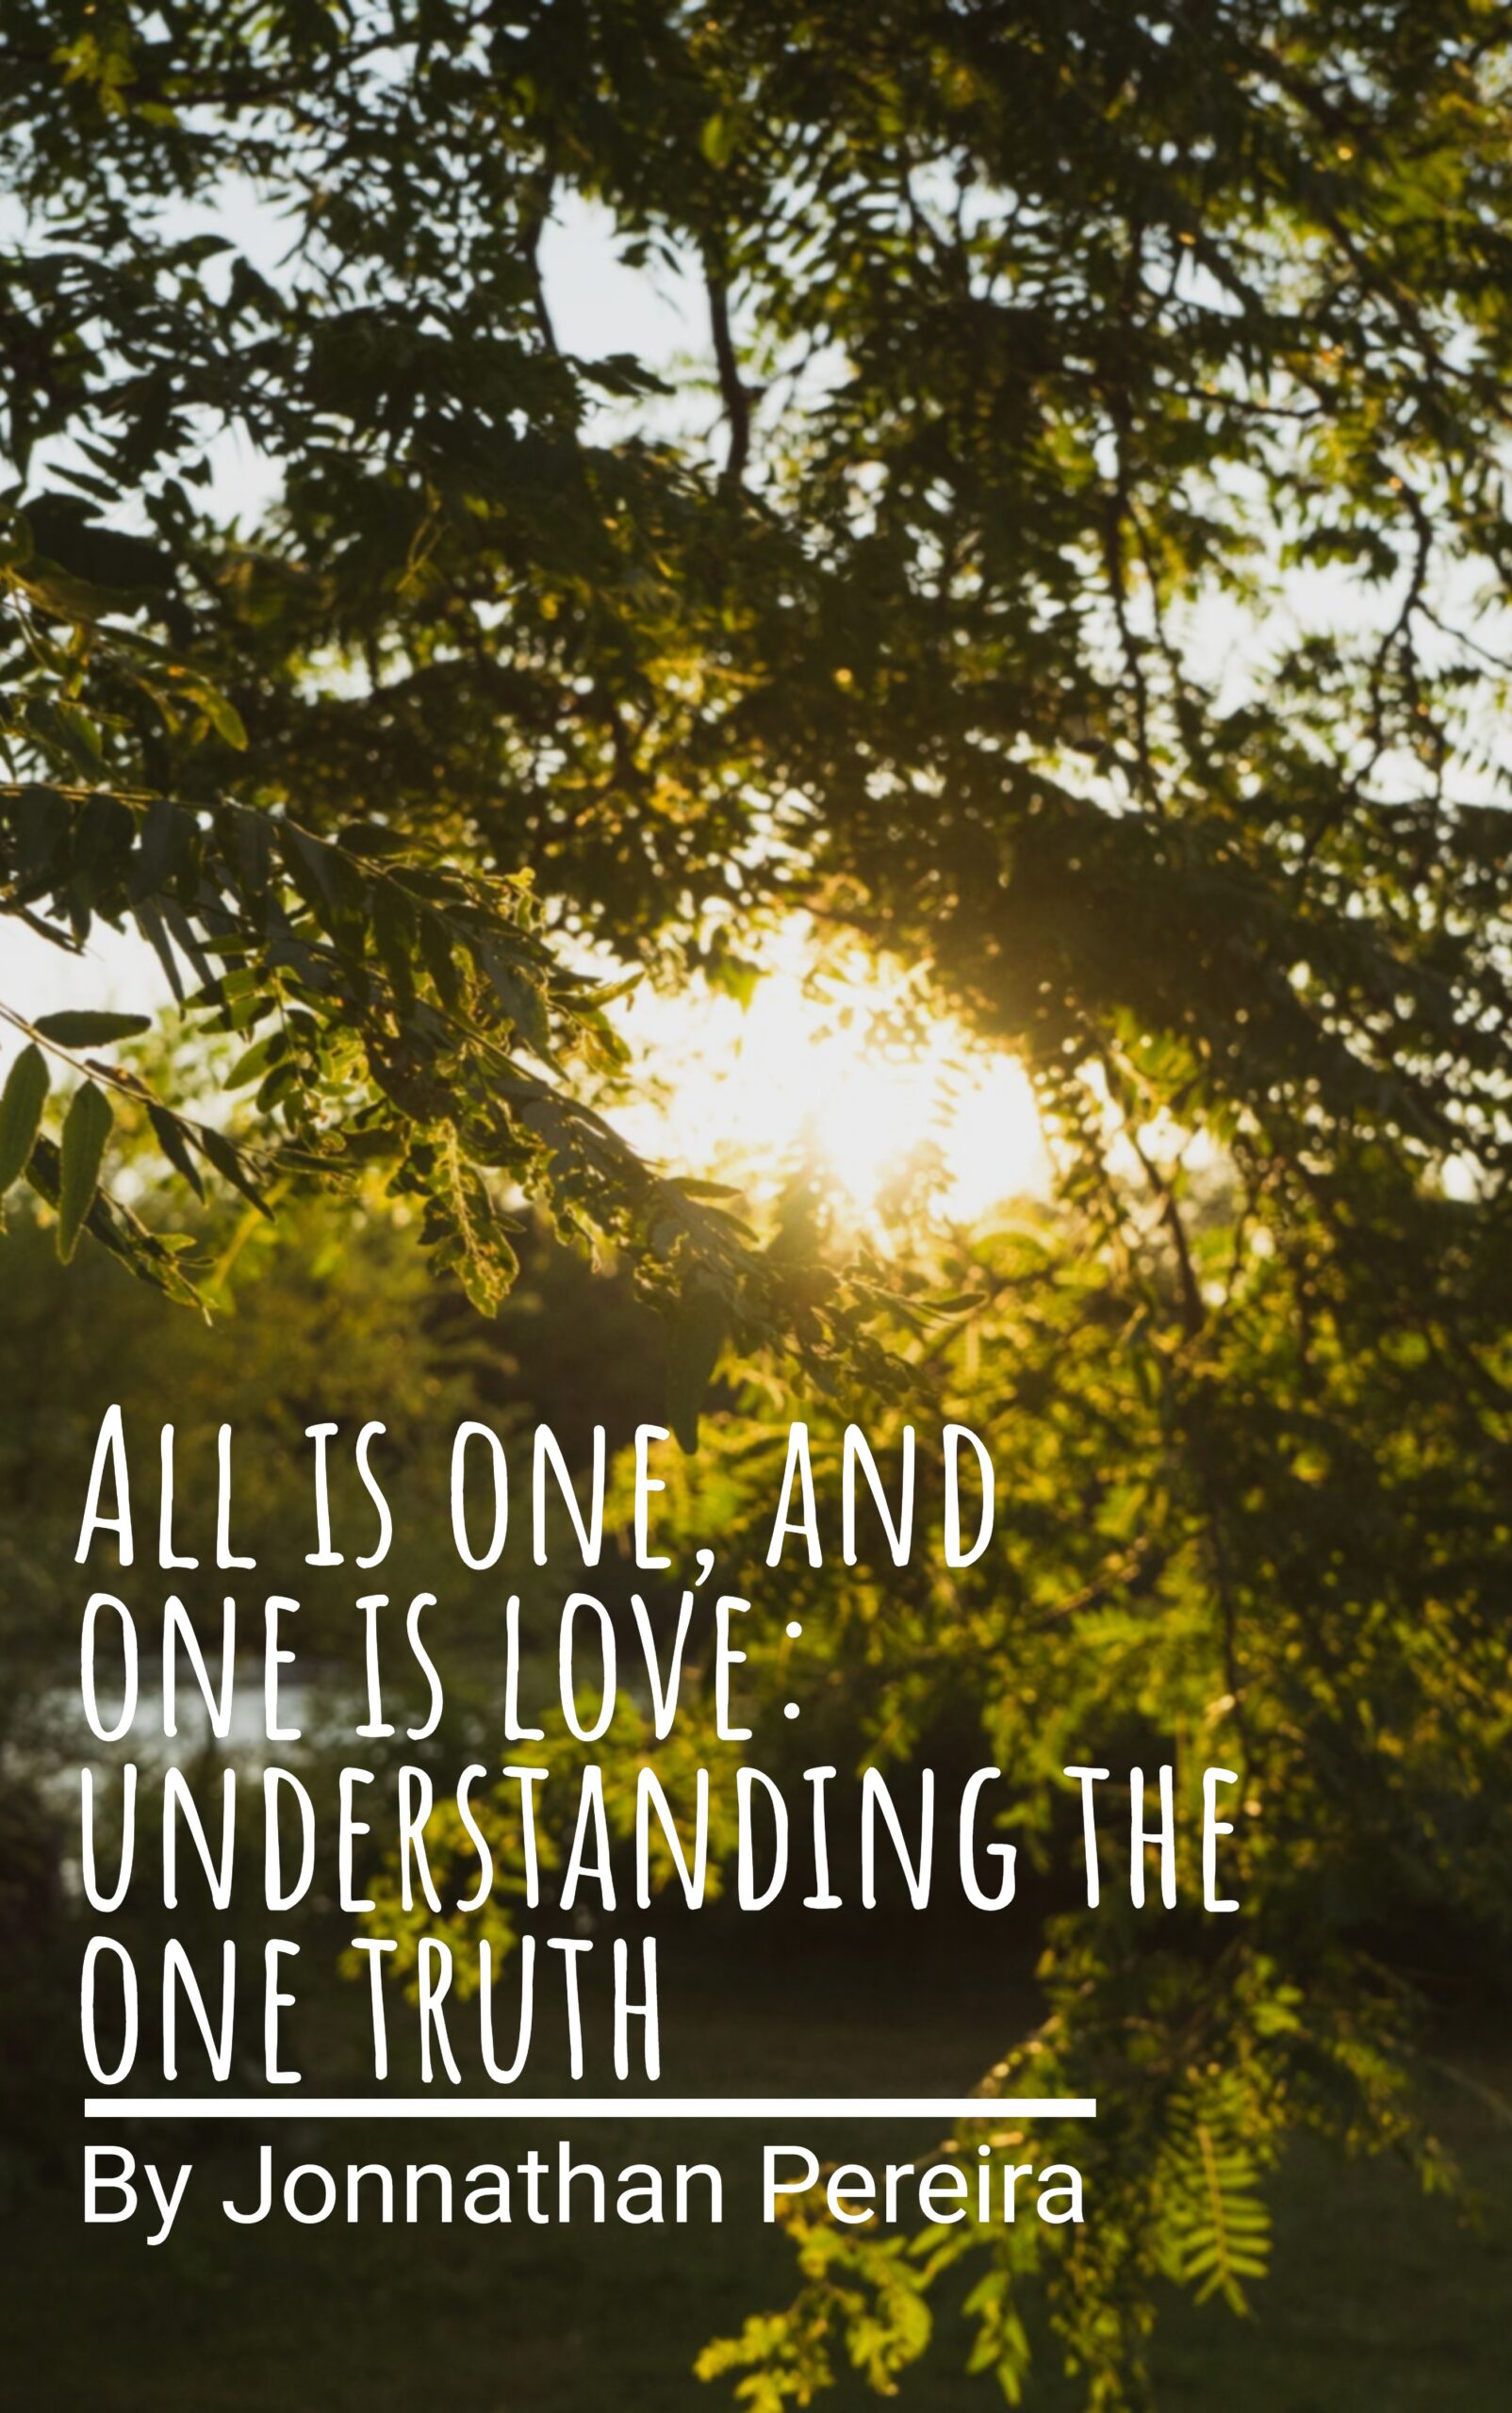 FREE: All Is One, and One Is Love: Understanding the One Truth by Jonnathan Pereira